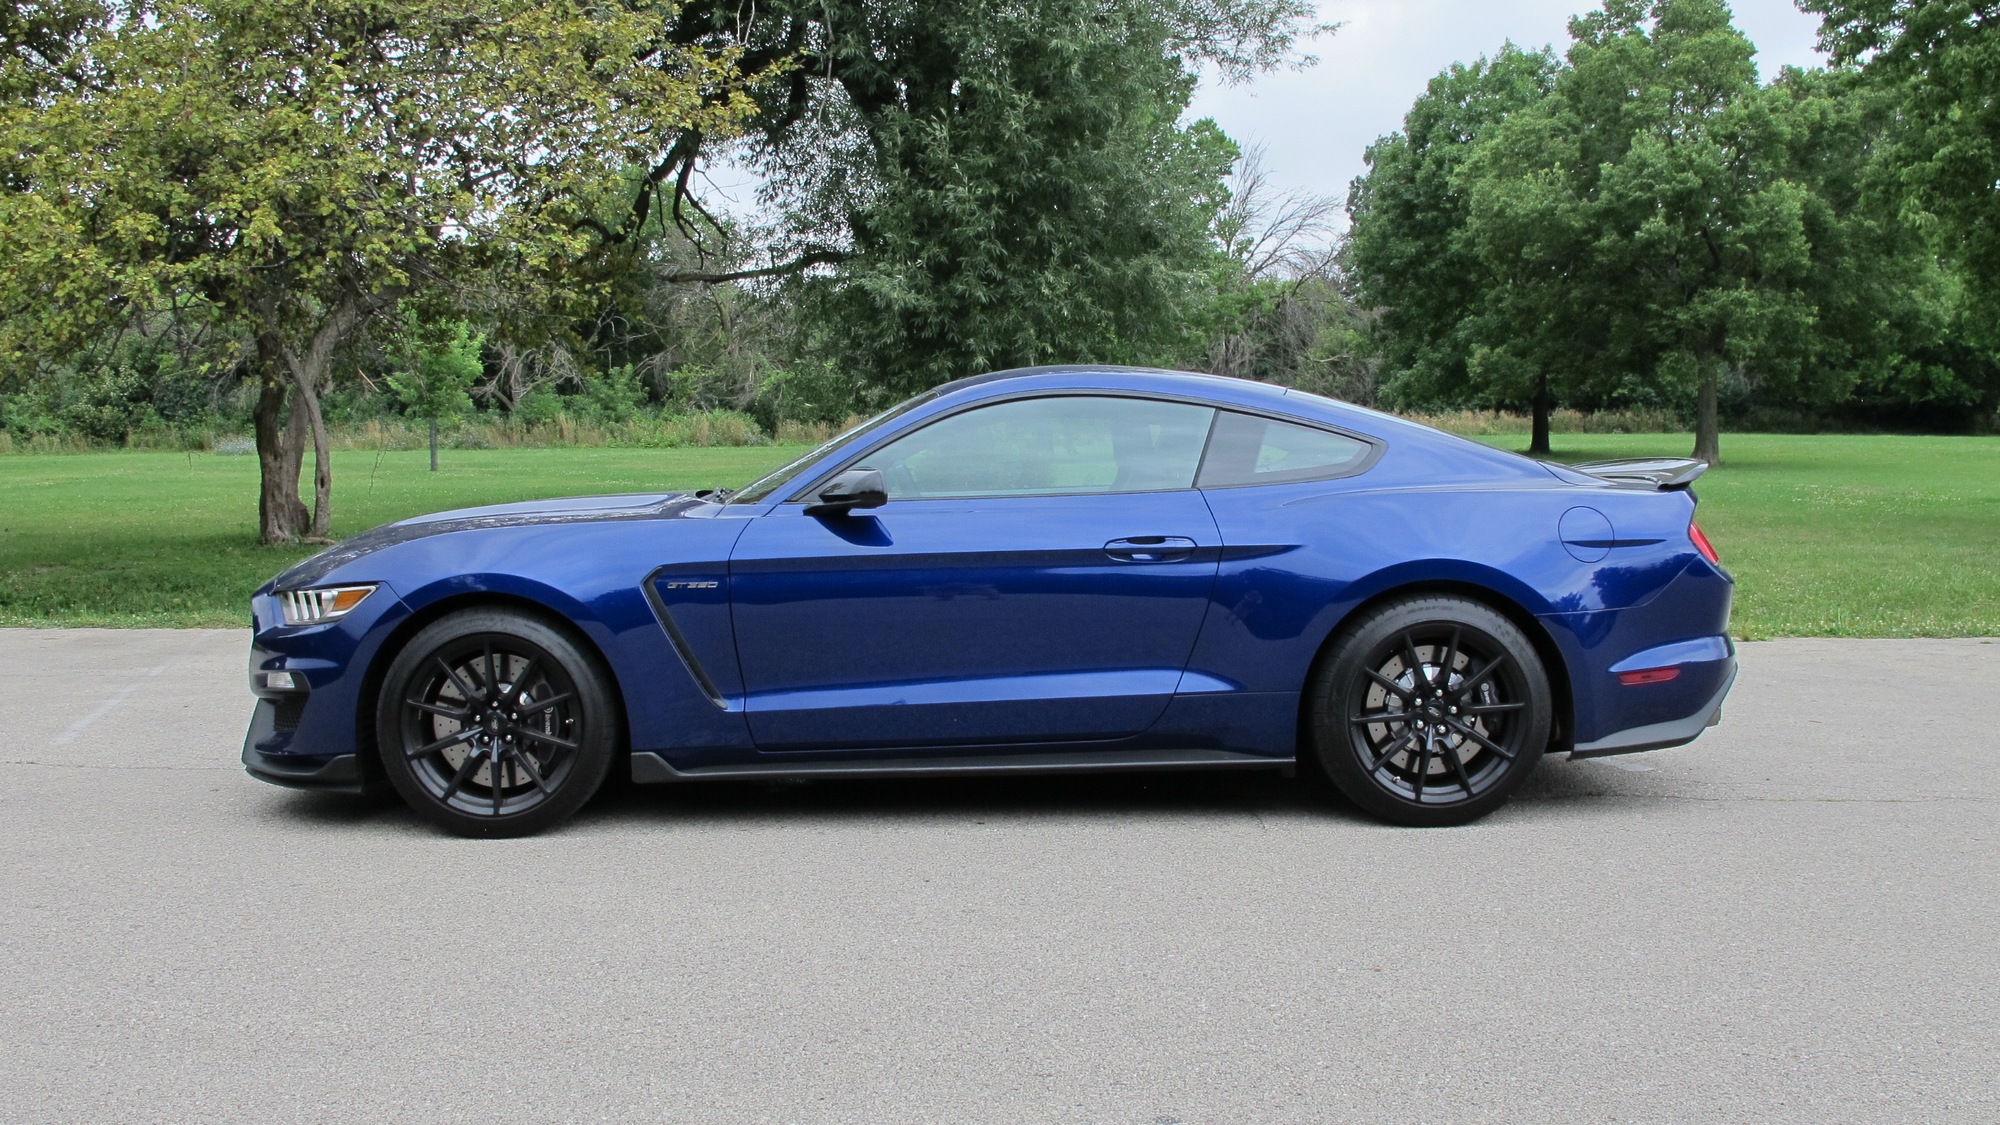 Commuting And The 2016 Ford Shelby Gt350 Mustang Don T Mix Second Drive